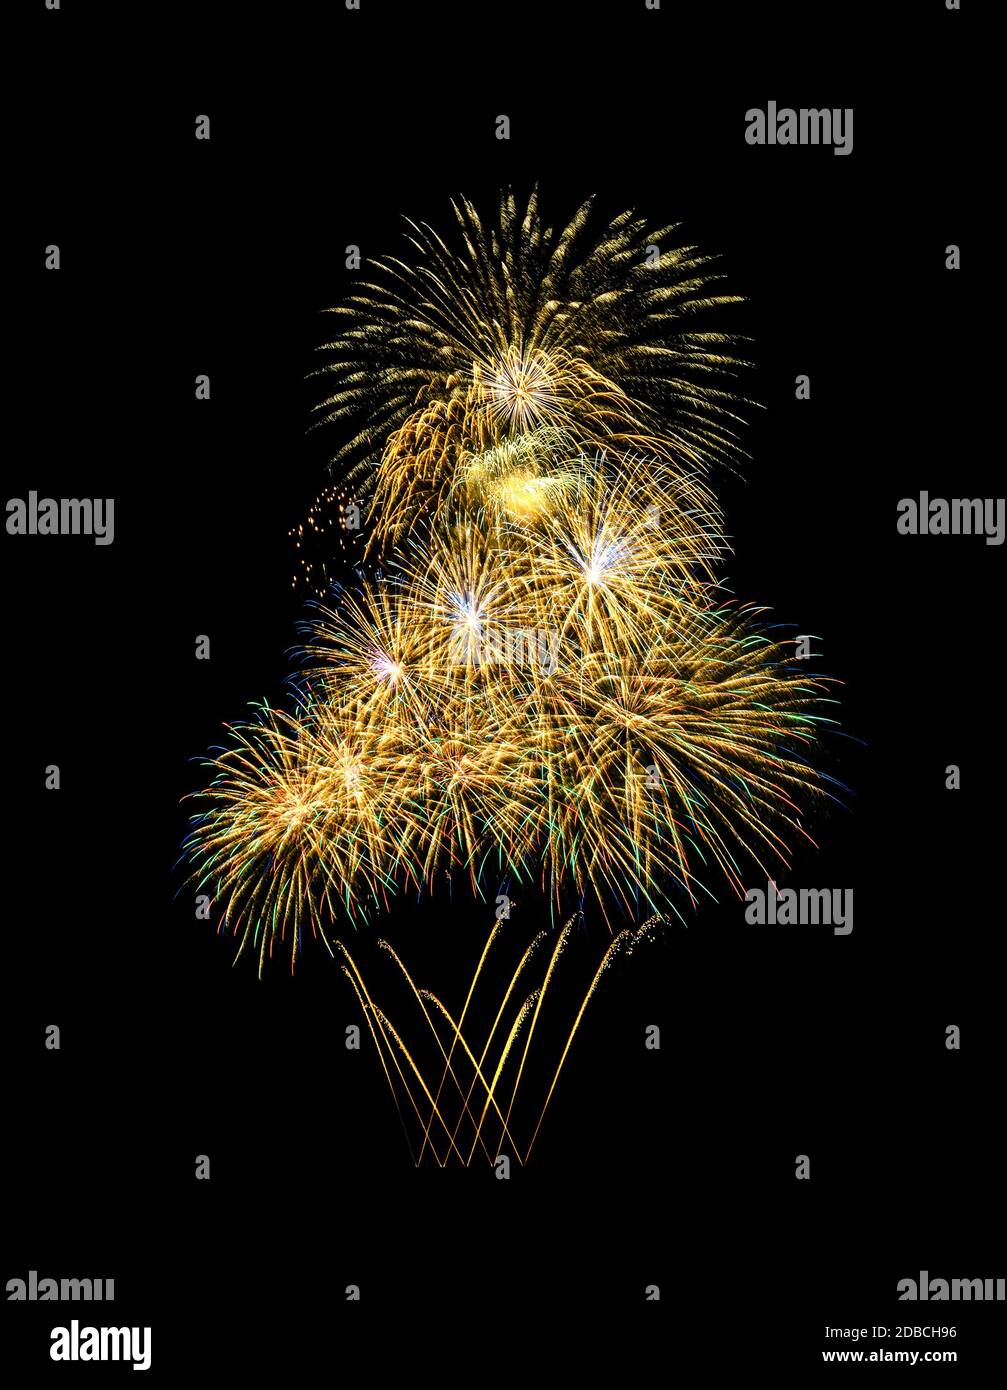 Beautiful colorful fireworks exploding in the night sky, isolated on black background. New year and anniversary concept. Stock Photo